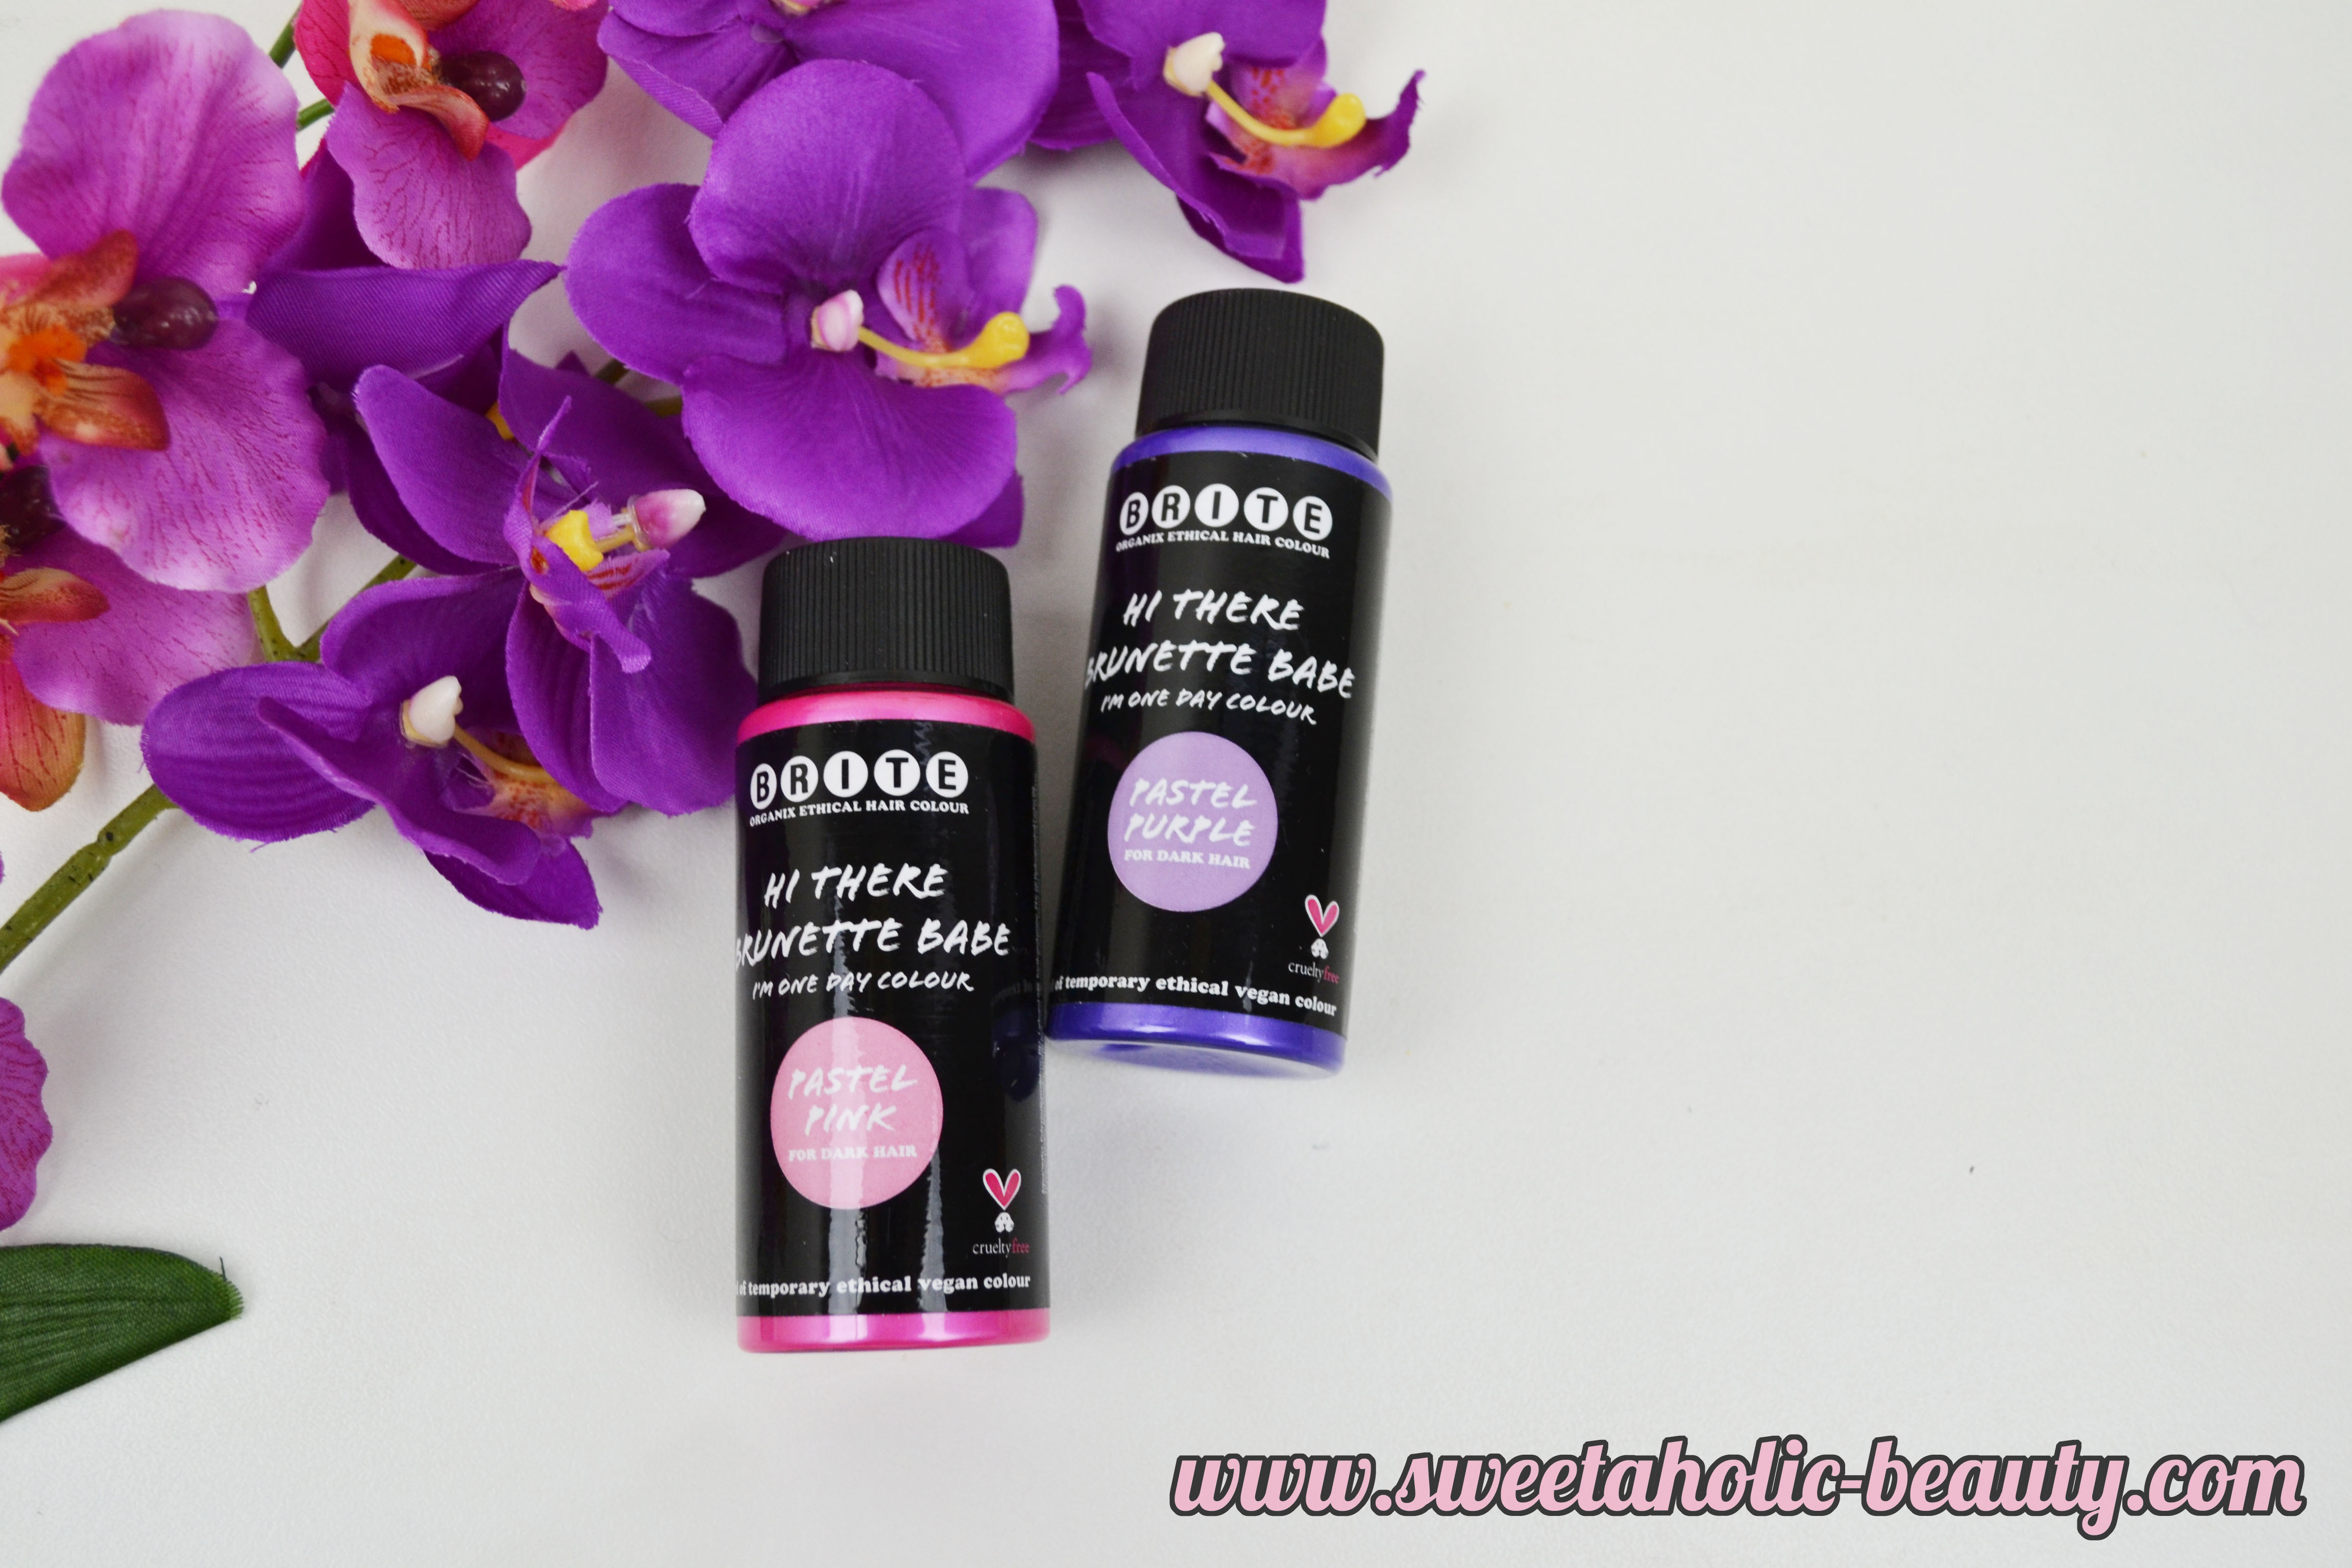 Brite Organix One Day Colour for Dark Hair Review - Sweetaholic Beauty